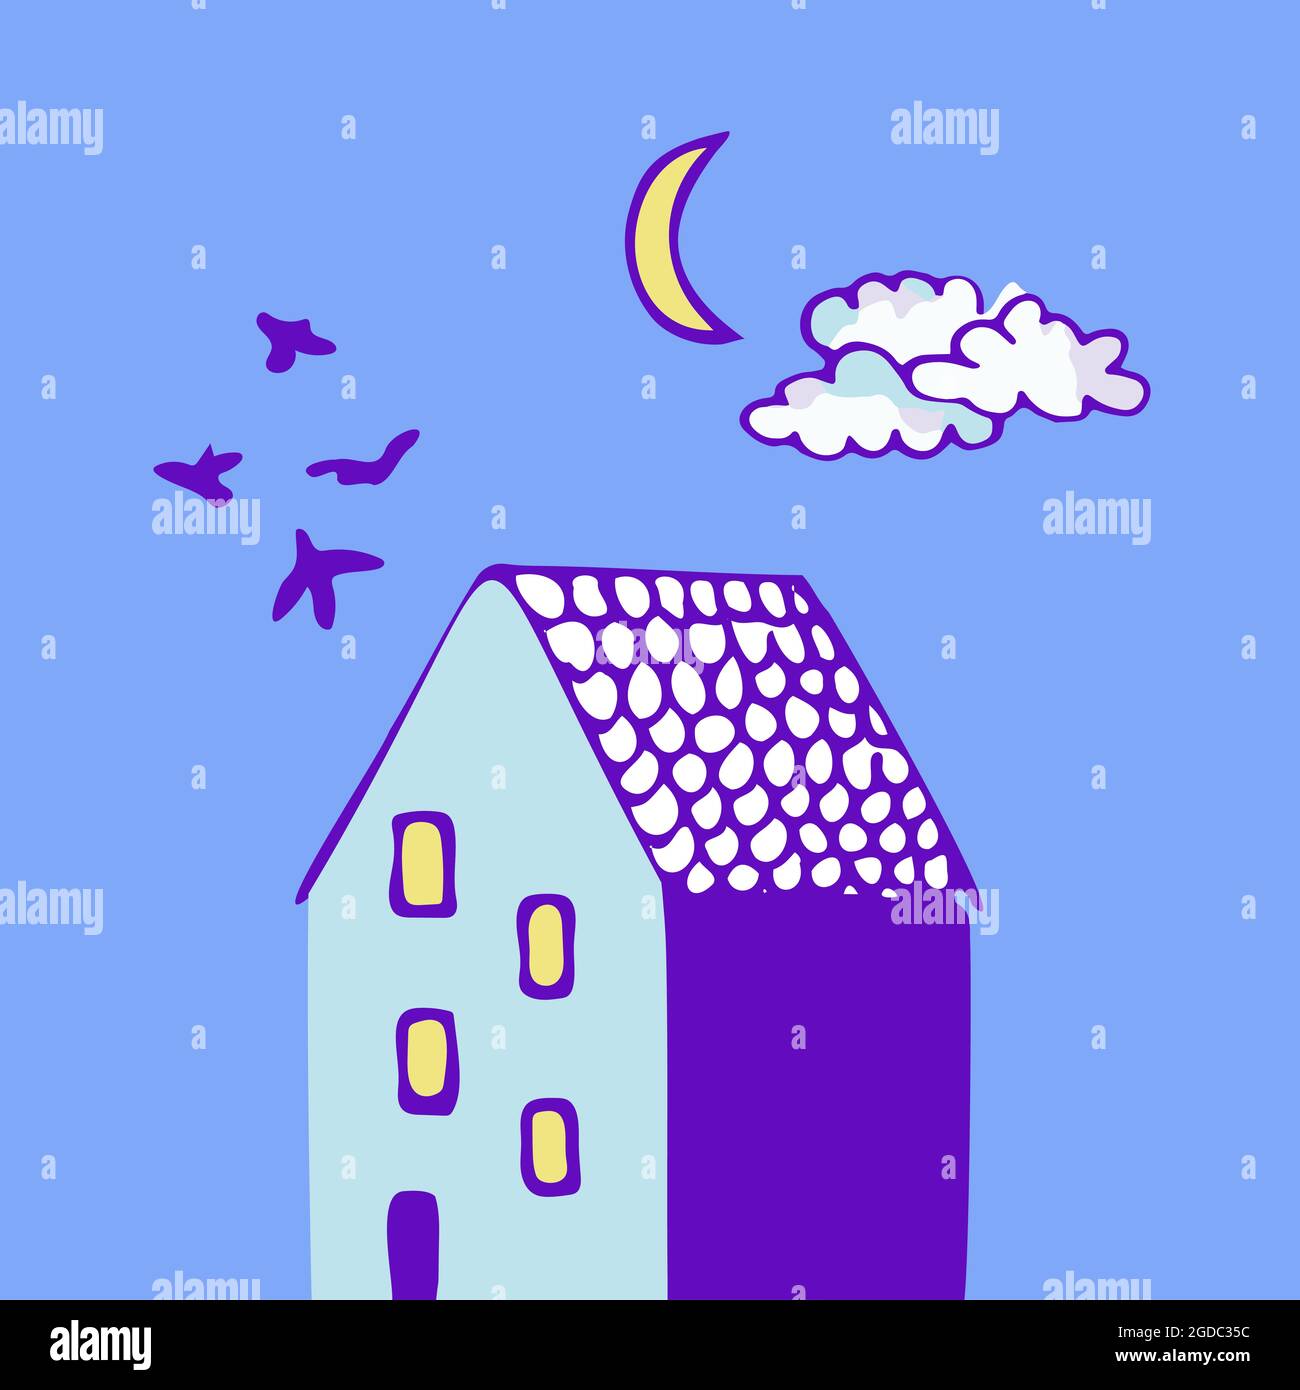 Vector illustration of a house with birds, sky and moon. Doodle design elements.  Stock Vector